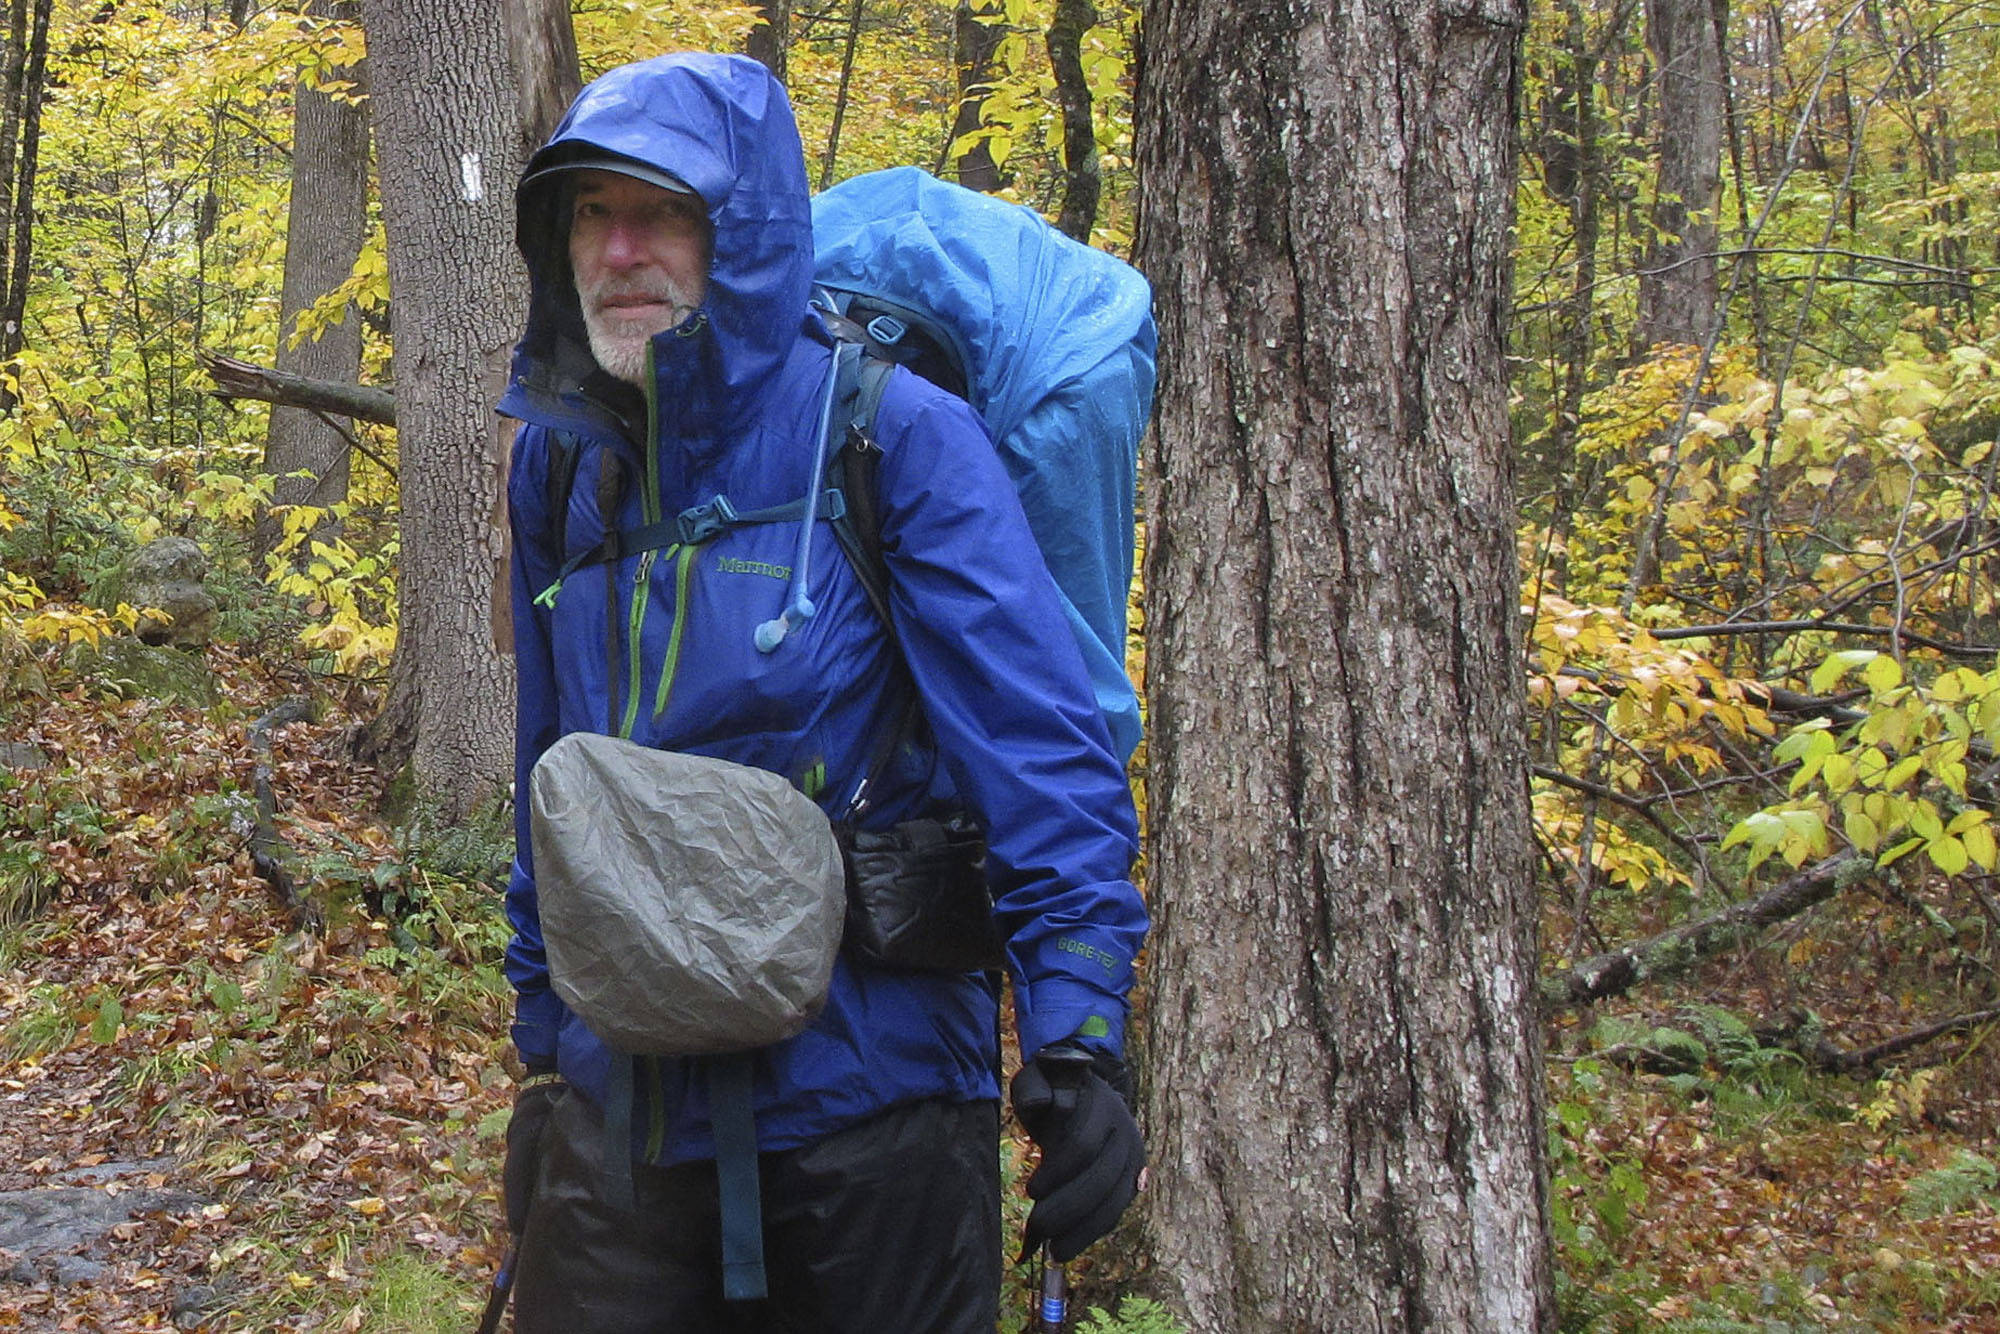 Artist Rob Mullen stands on Long Trail, the country’s oldest long distance trail, in Manchester, Vt., on Tuesday, Oct. 13, 2020. Mullen was nearing the end of his 272-mile month-long hike down the length of Vermont, painting along the way. (AP Photo/Lisa Rathke)